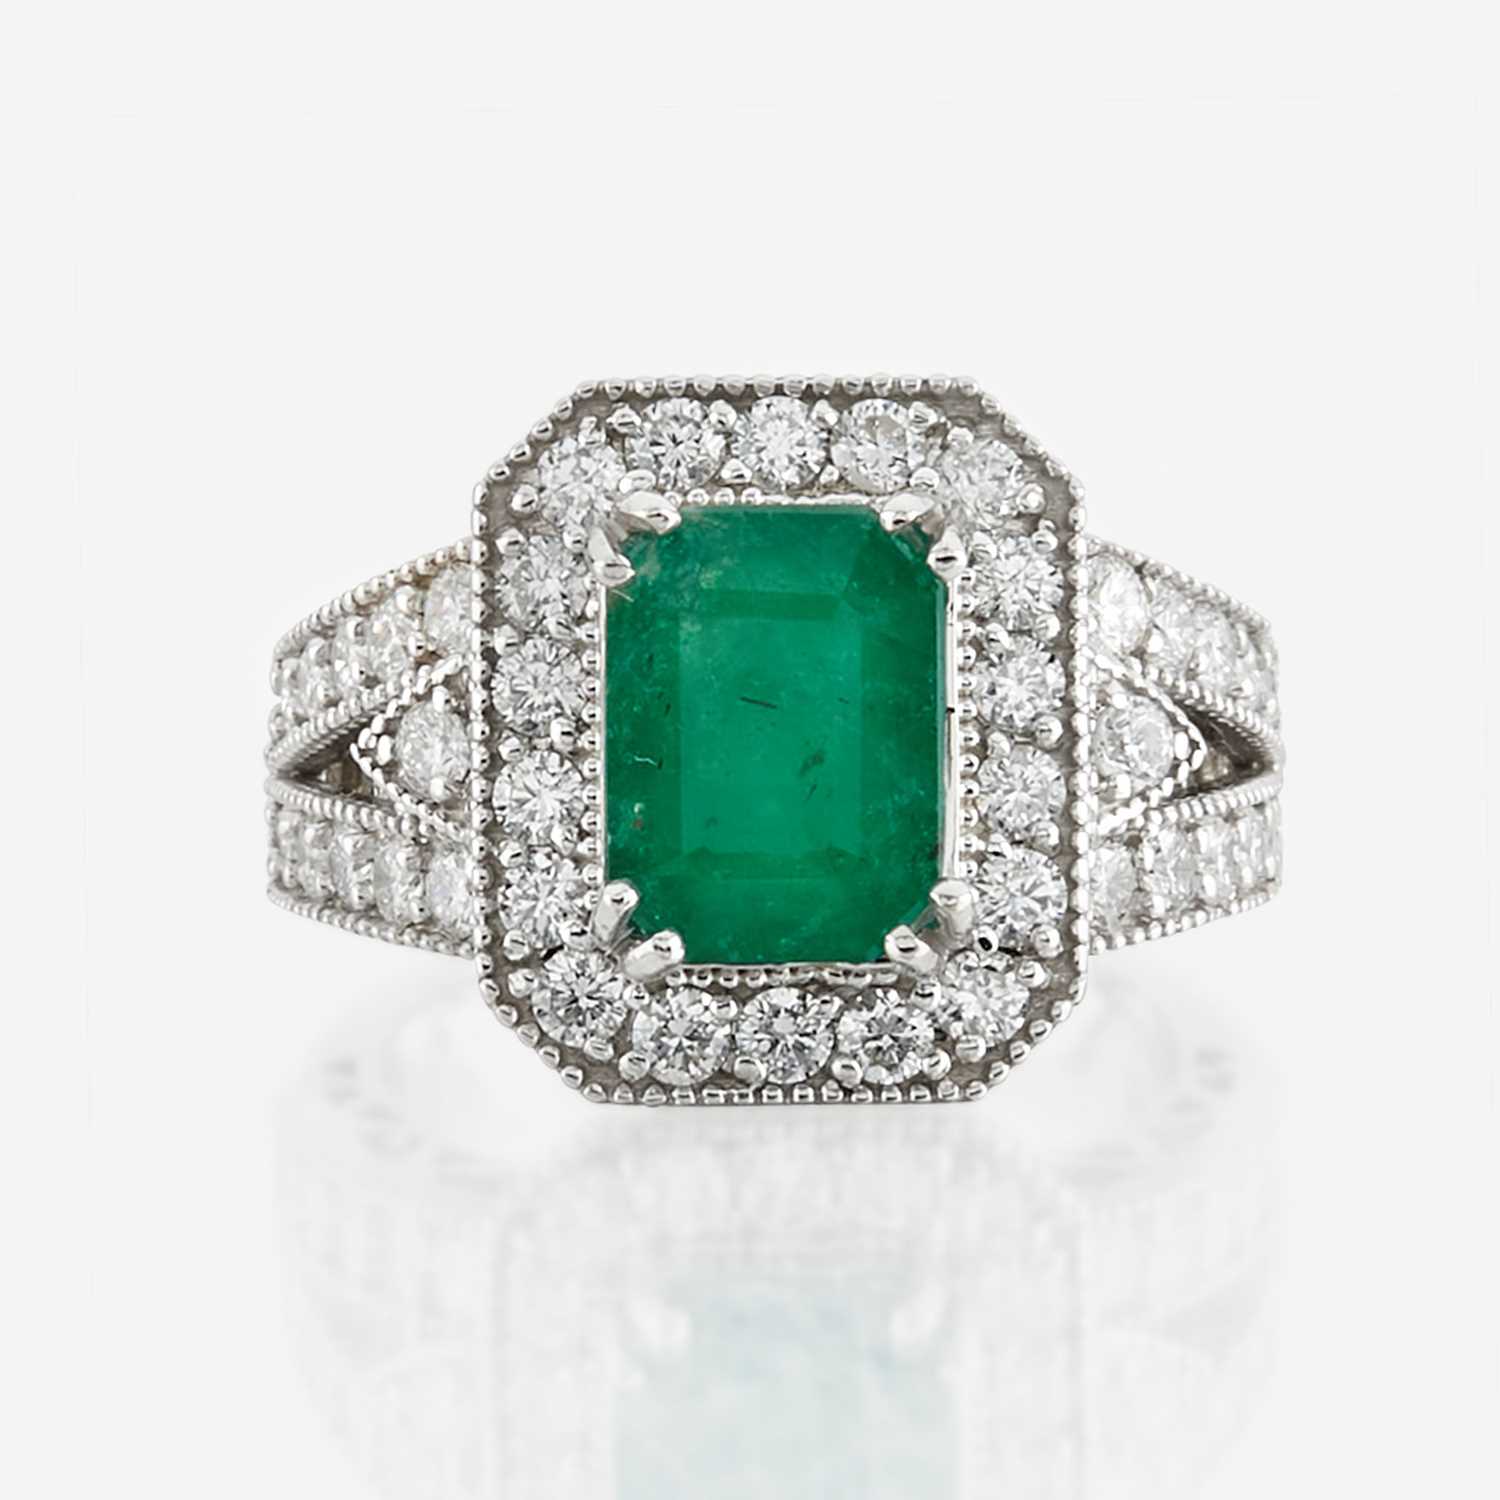 Lot 10 - An emerald, diamond, and white gold ring